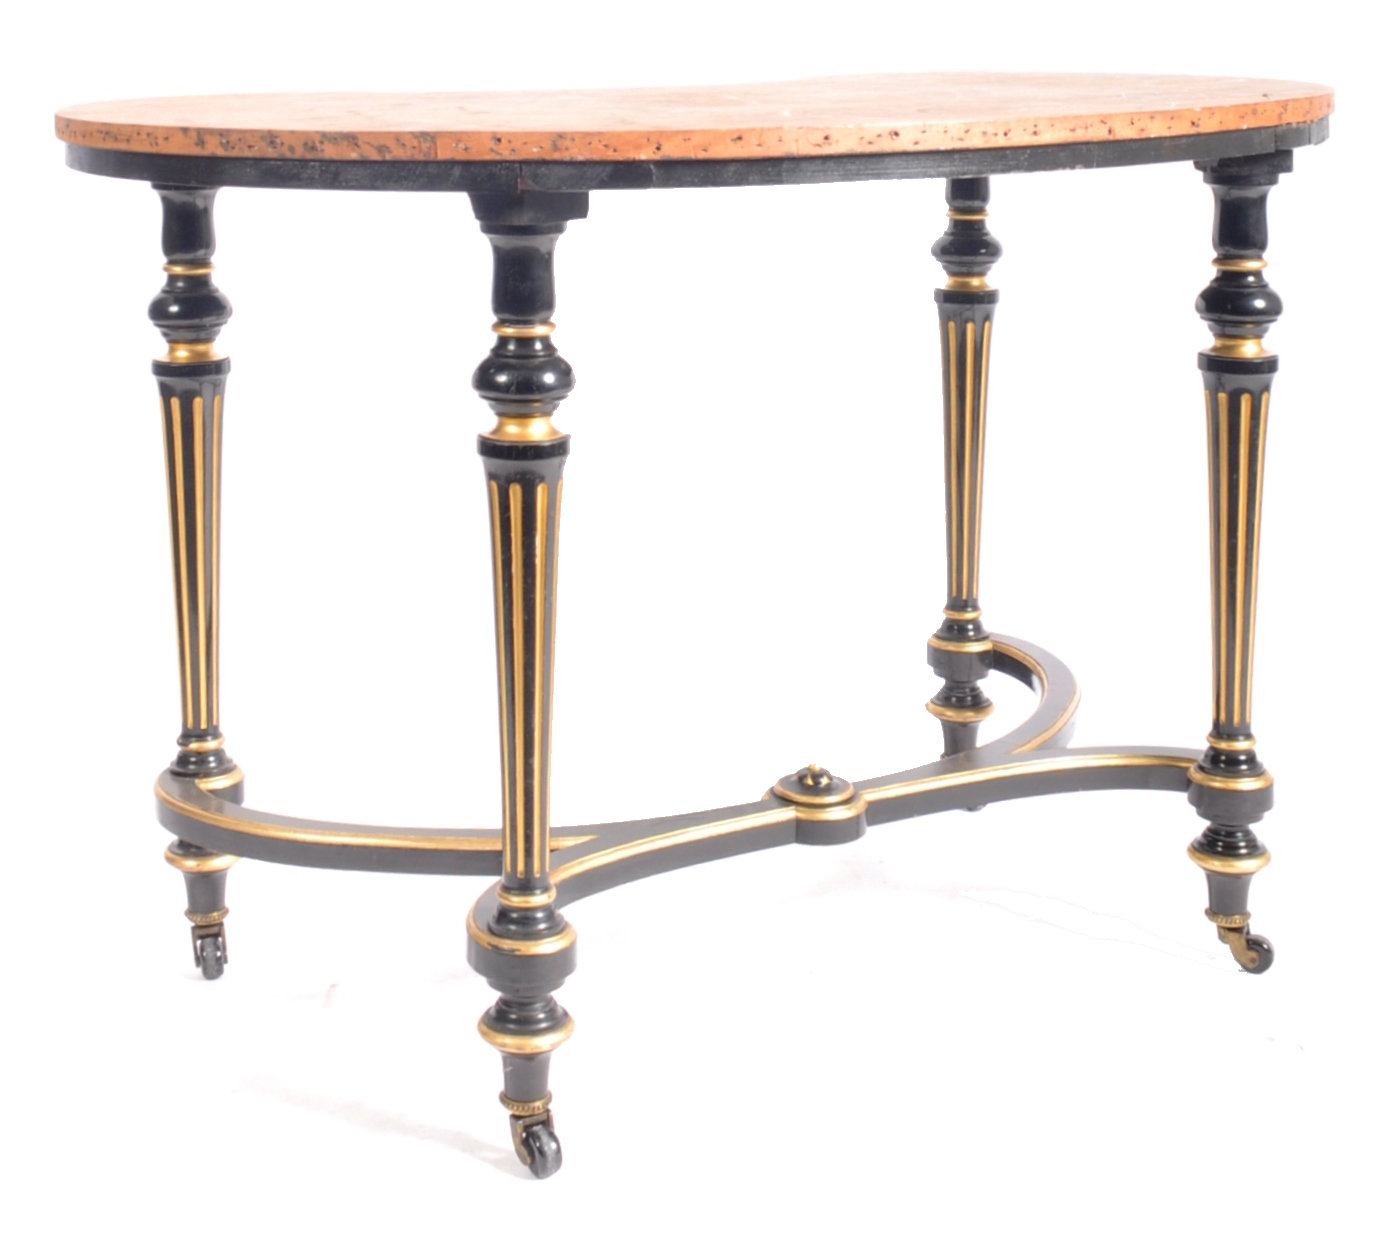 19TH CENTURY EMPIRE KIDNEY SHAPED WRITING TABLE DESK - Image 2 of 6